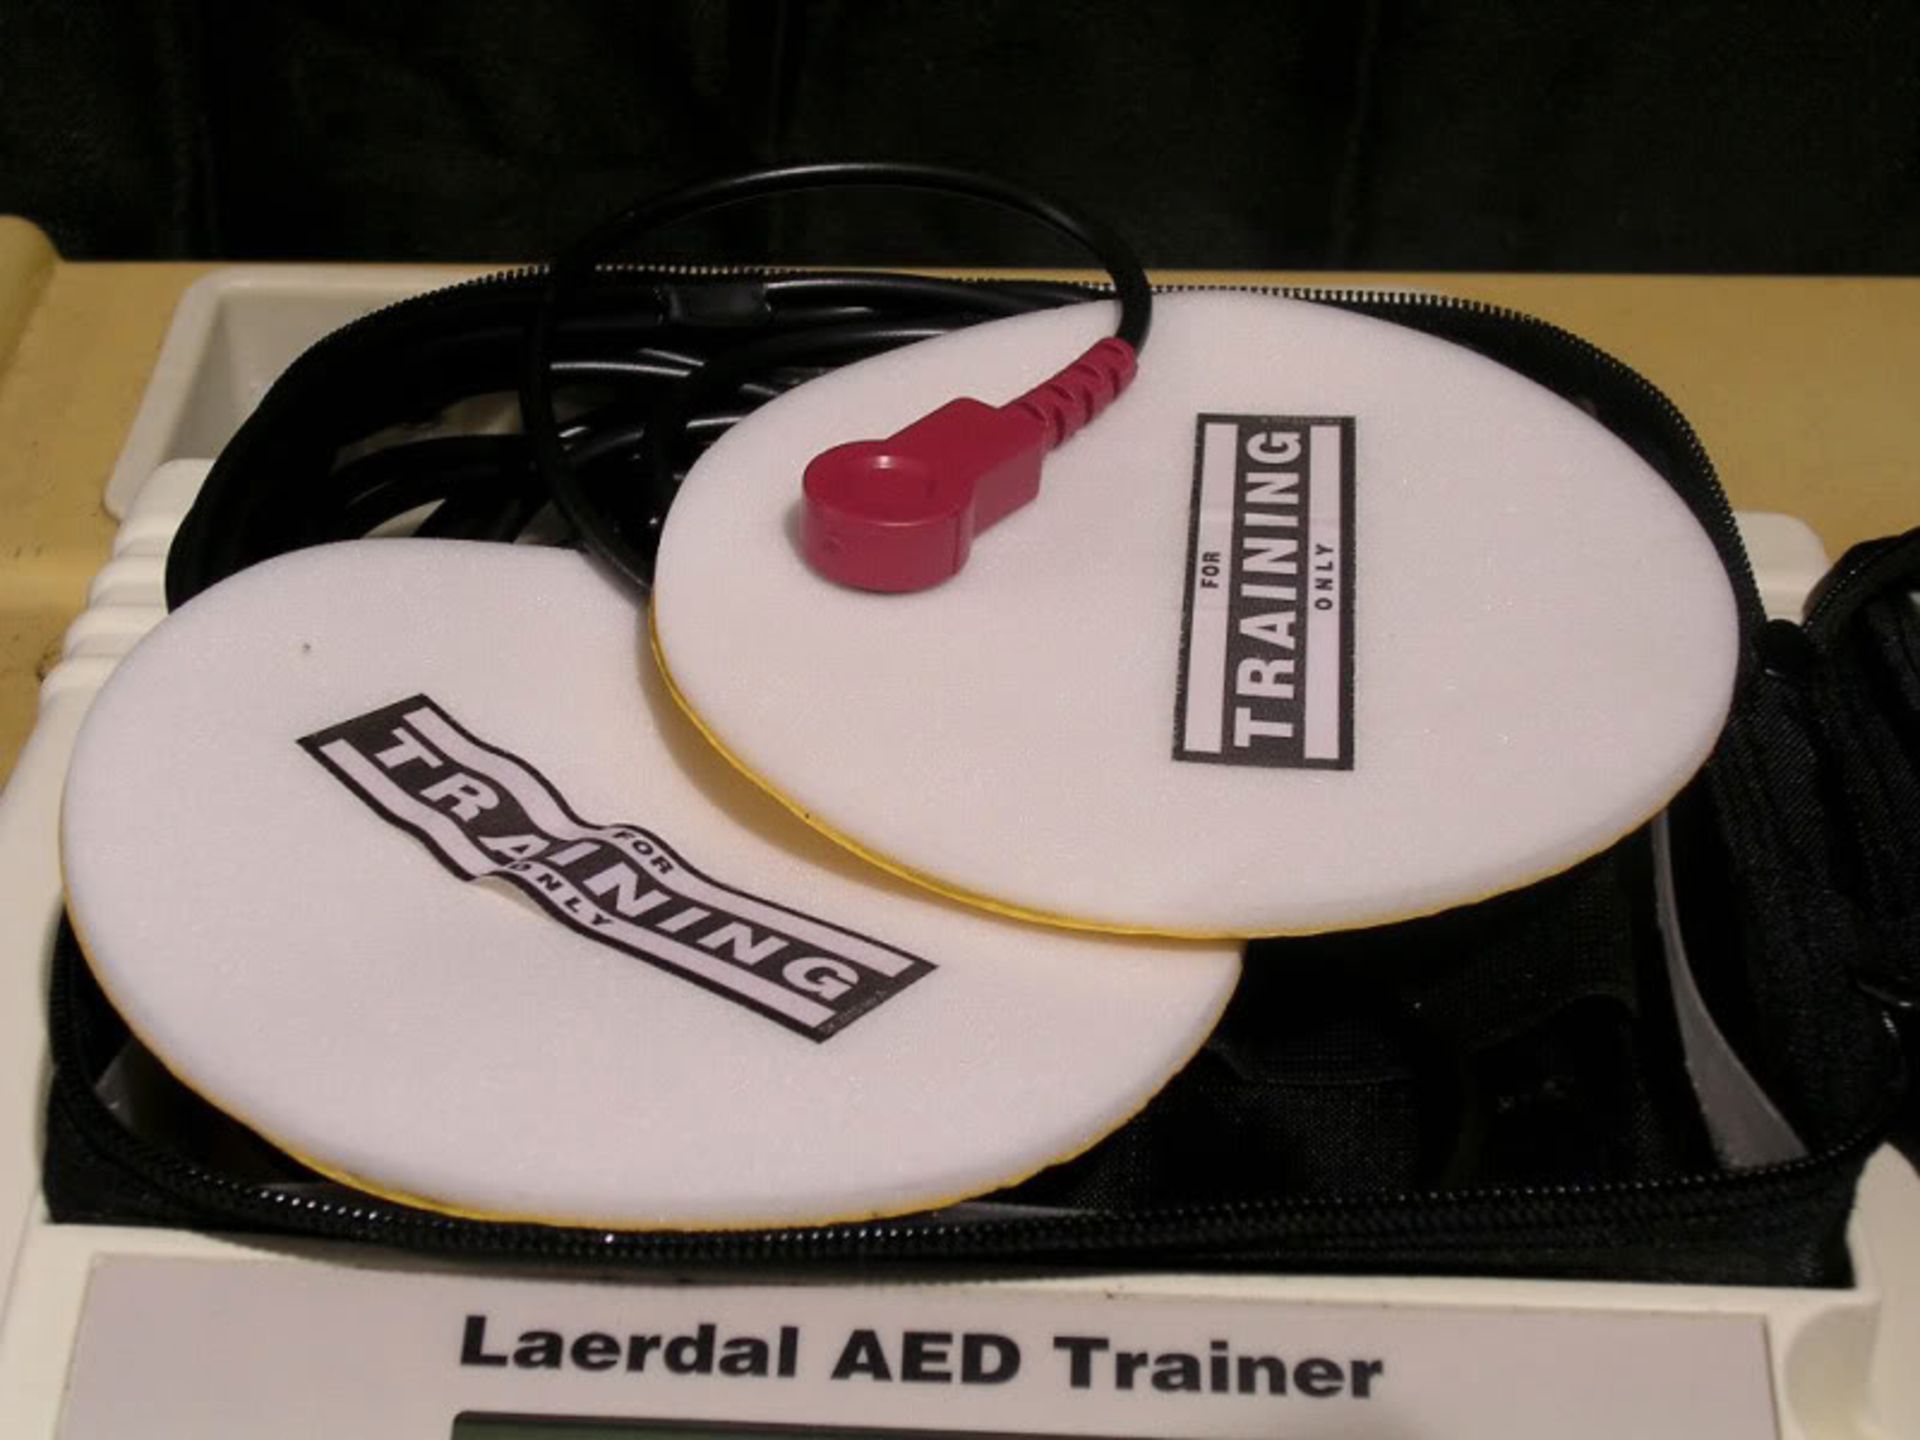 Laerdal AED Trainer with Pads, Catalog # 930090, Qty 1, 221497662020 - Image 4 of 6